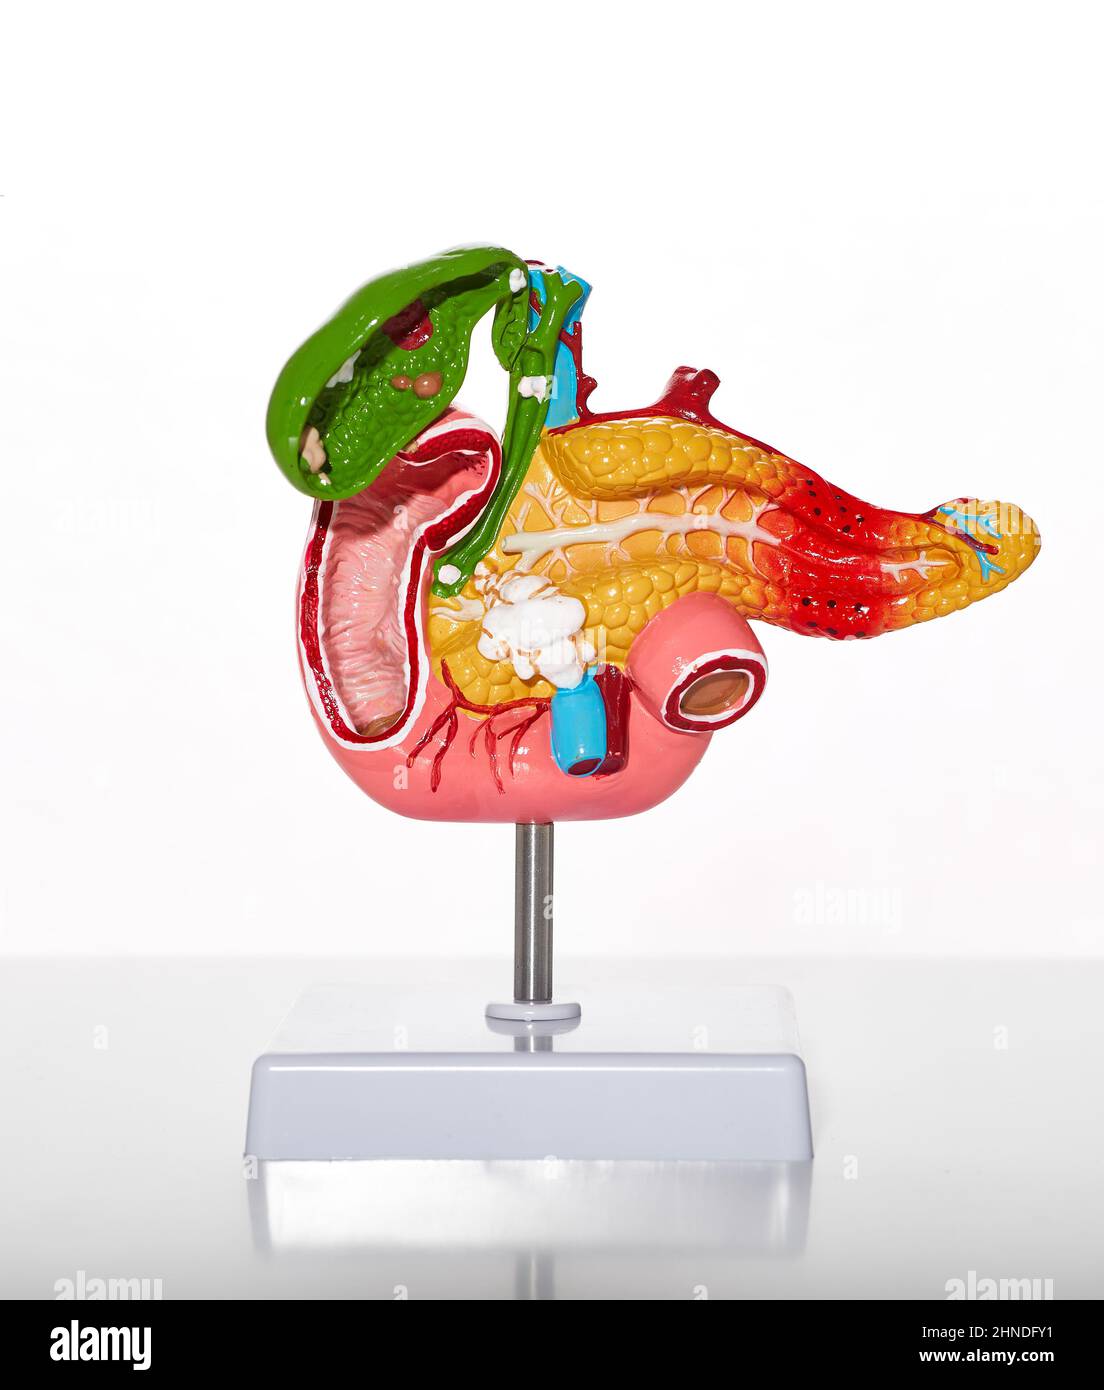 Anatomical model of human pancreas and gallbladder with pathologies and diseases for medical and biological education, close-up Stock Photo